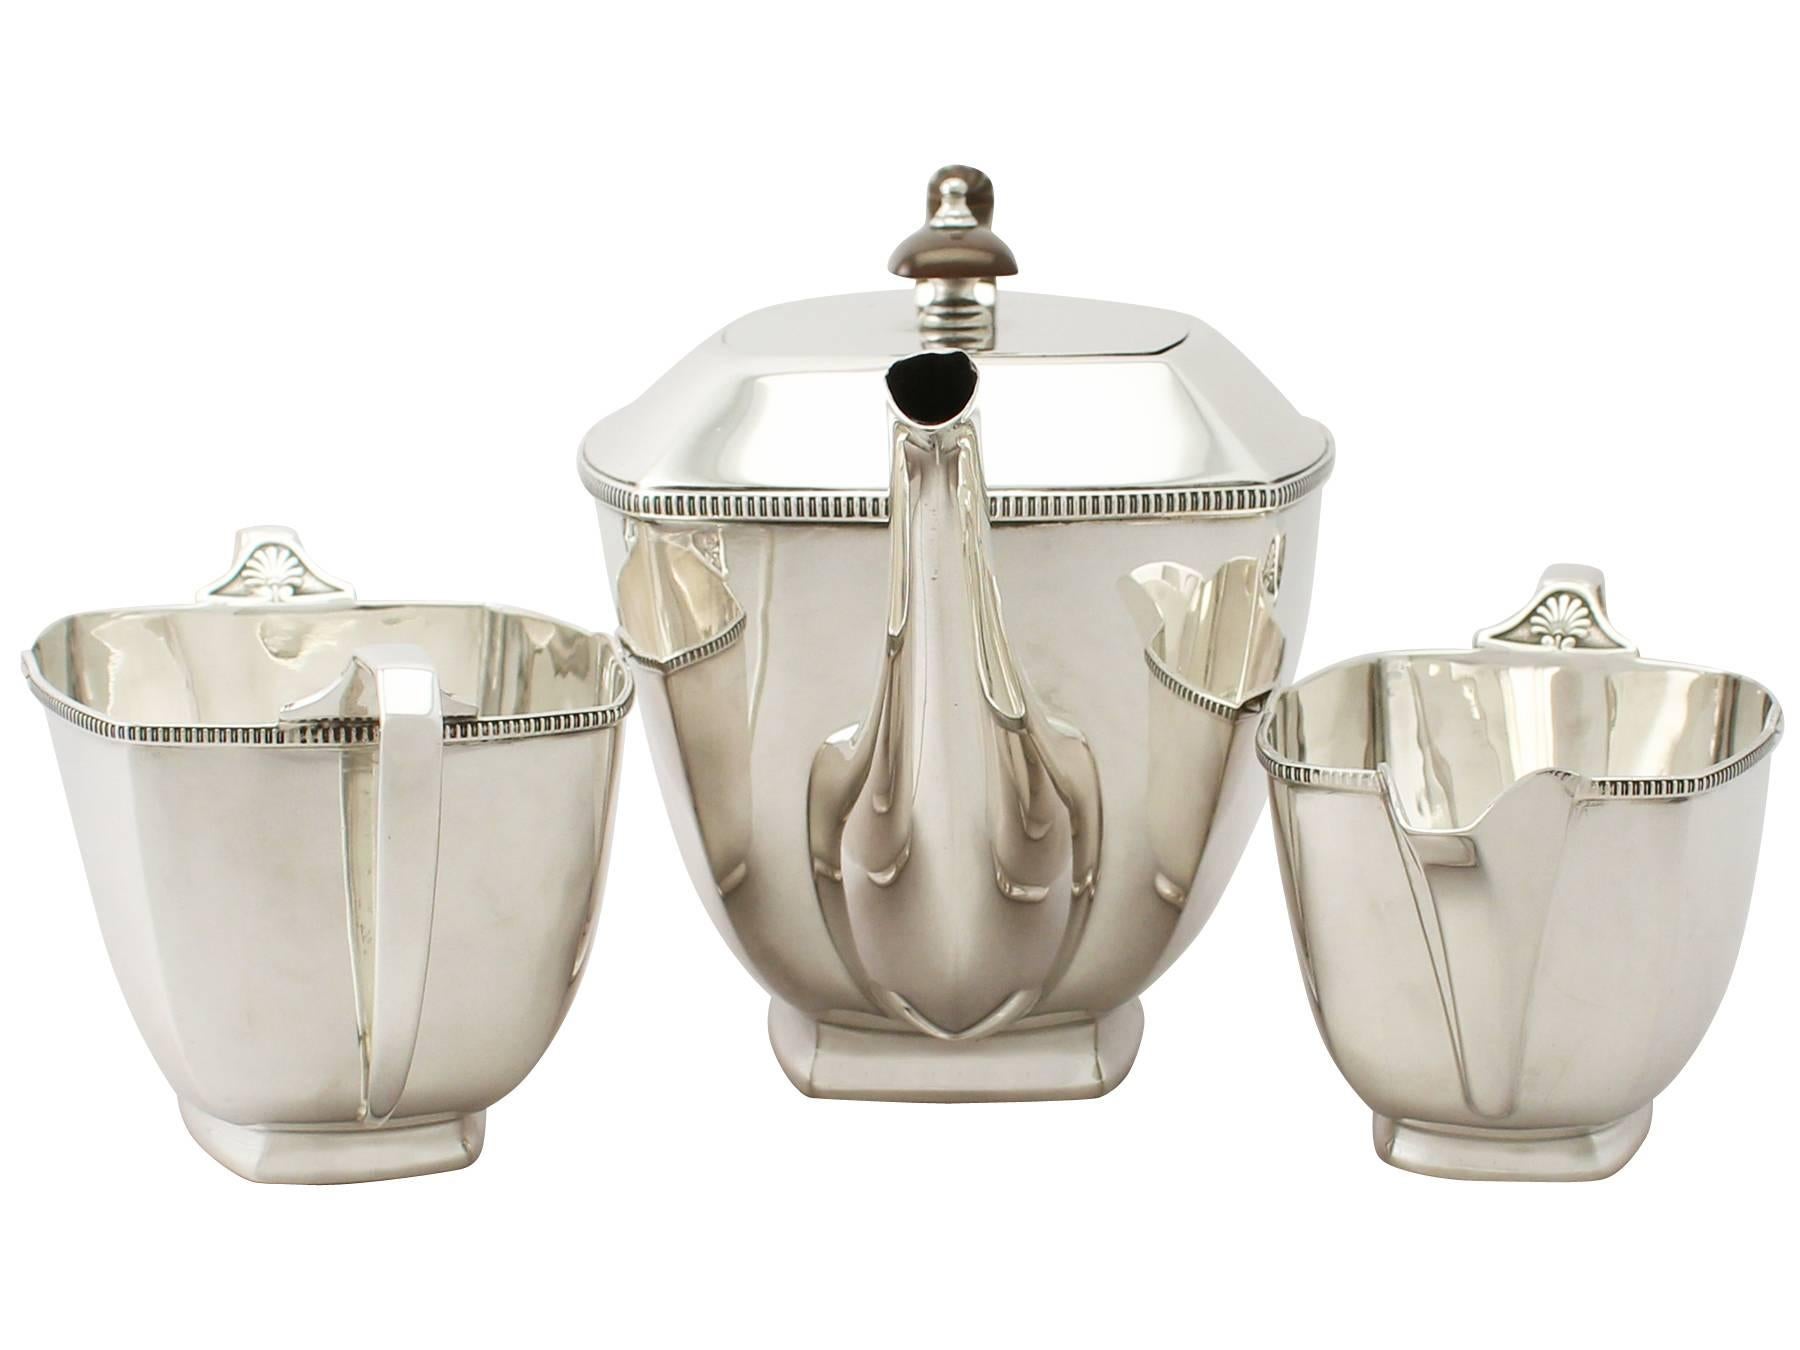 An exceptional, fine and impressive antique George V English sterling silver three-piece tea service made in the Art Deco style; an addition to our teaware collection

This exceptional antique George V sterling silver three-piece tea set consists